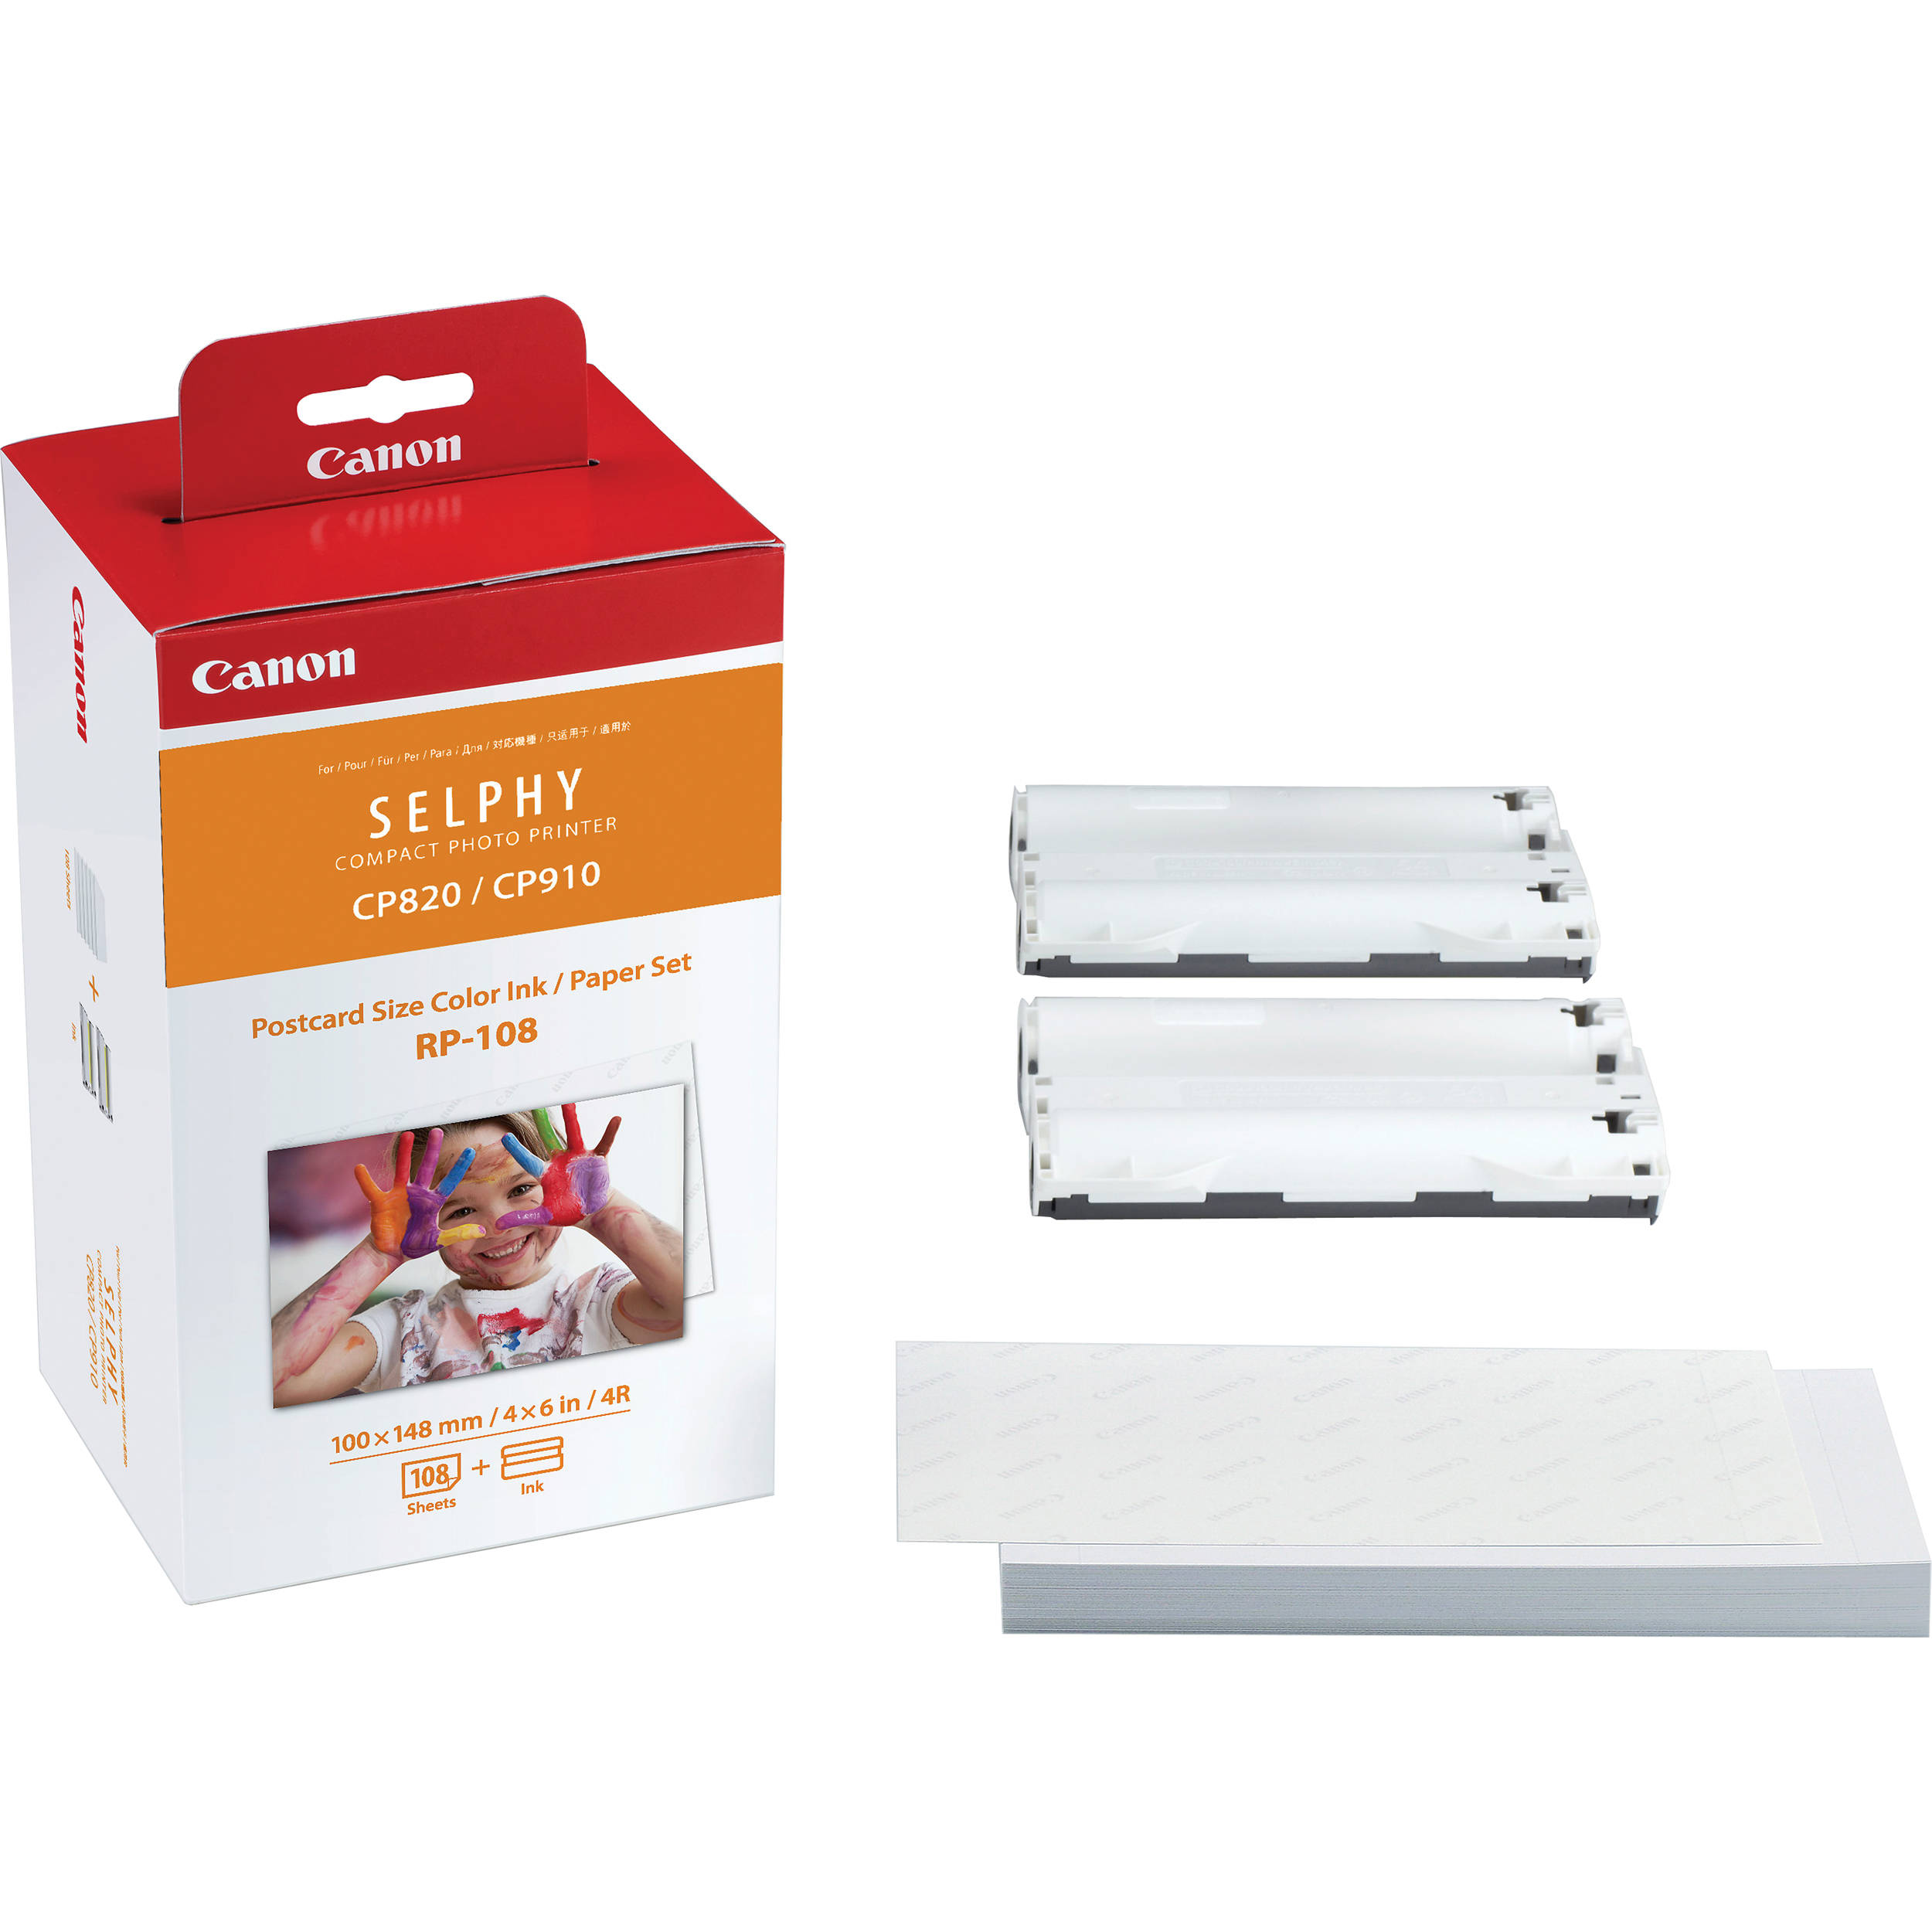 Canon Selphy Printer Paper